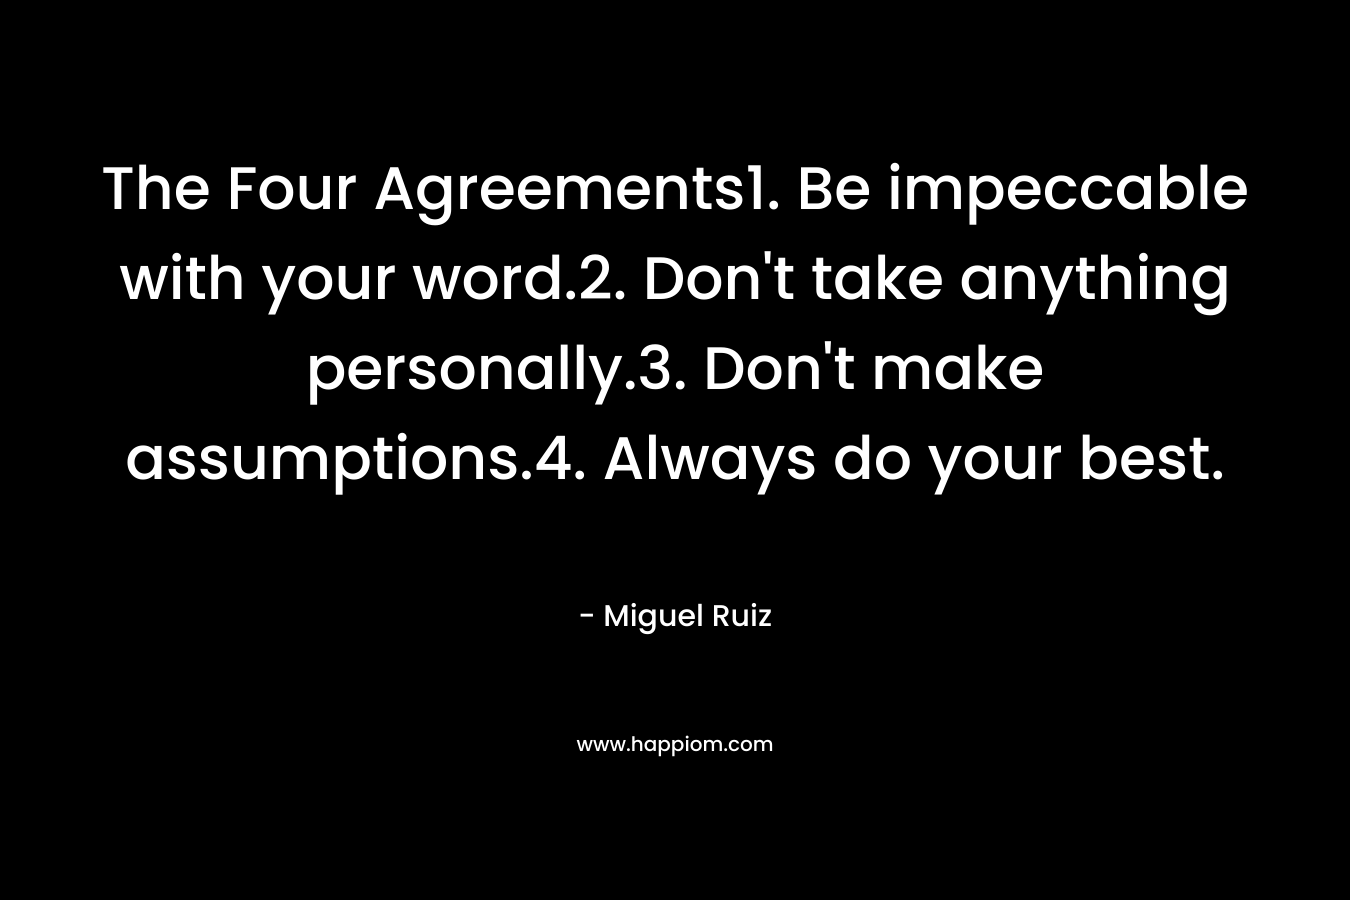 The Four Agreements1. Be impeccable with your word.2. Don't take anything personally.3. Don't make assumptions.4. Always do your best. 